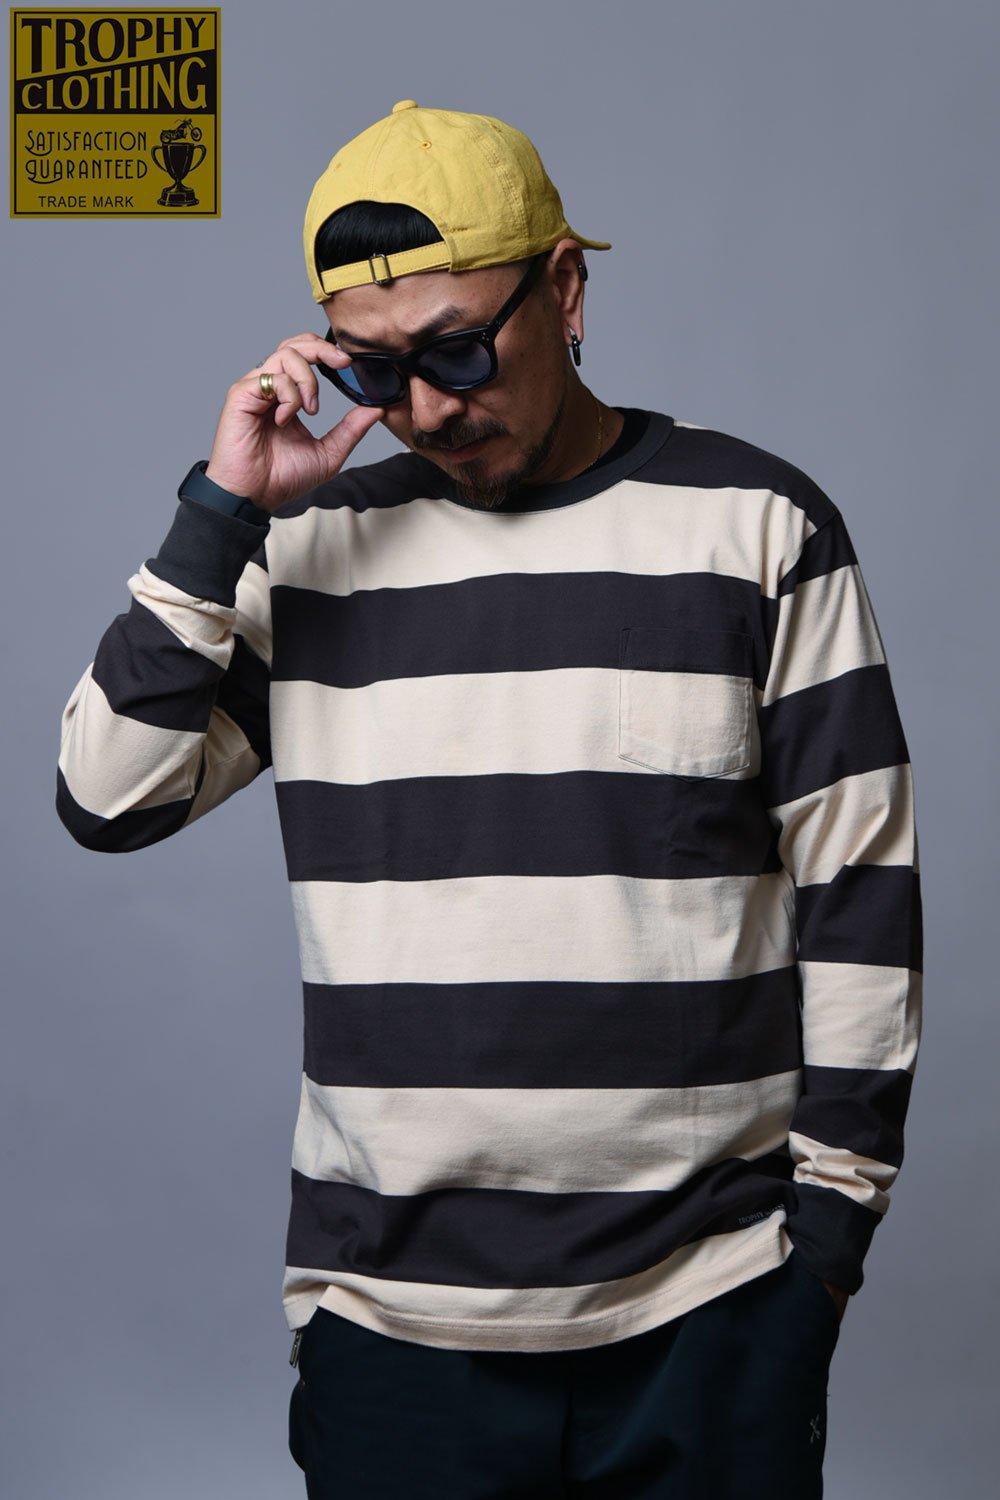 TROPHY CLOTHING(トロフィークロージング) ボーダーロングスリーブTシャツ WIDE BORDER L/S TEE TR22AW-201  通販正規取扱 | ハーレムストア公式通販サイト